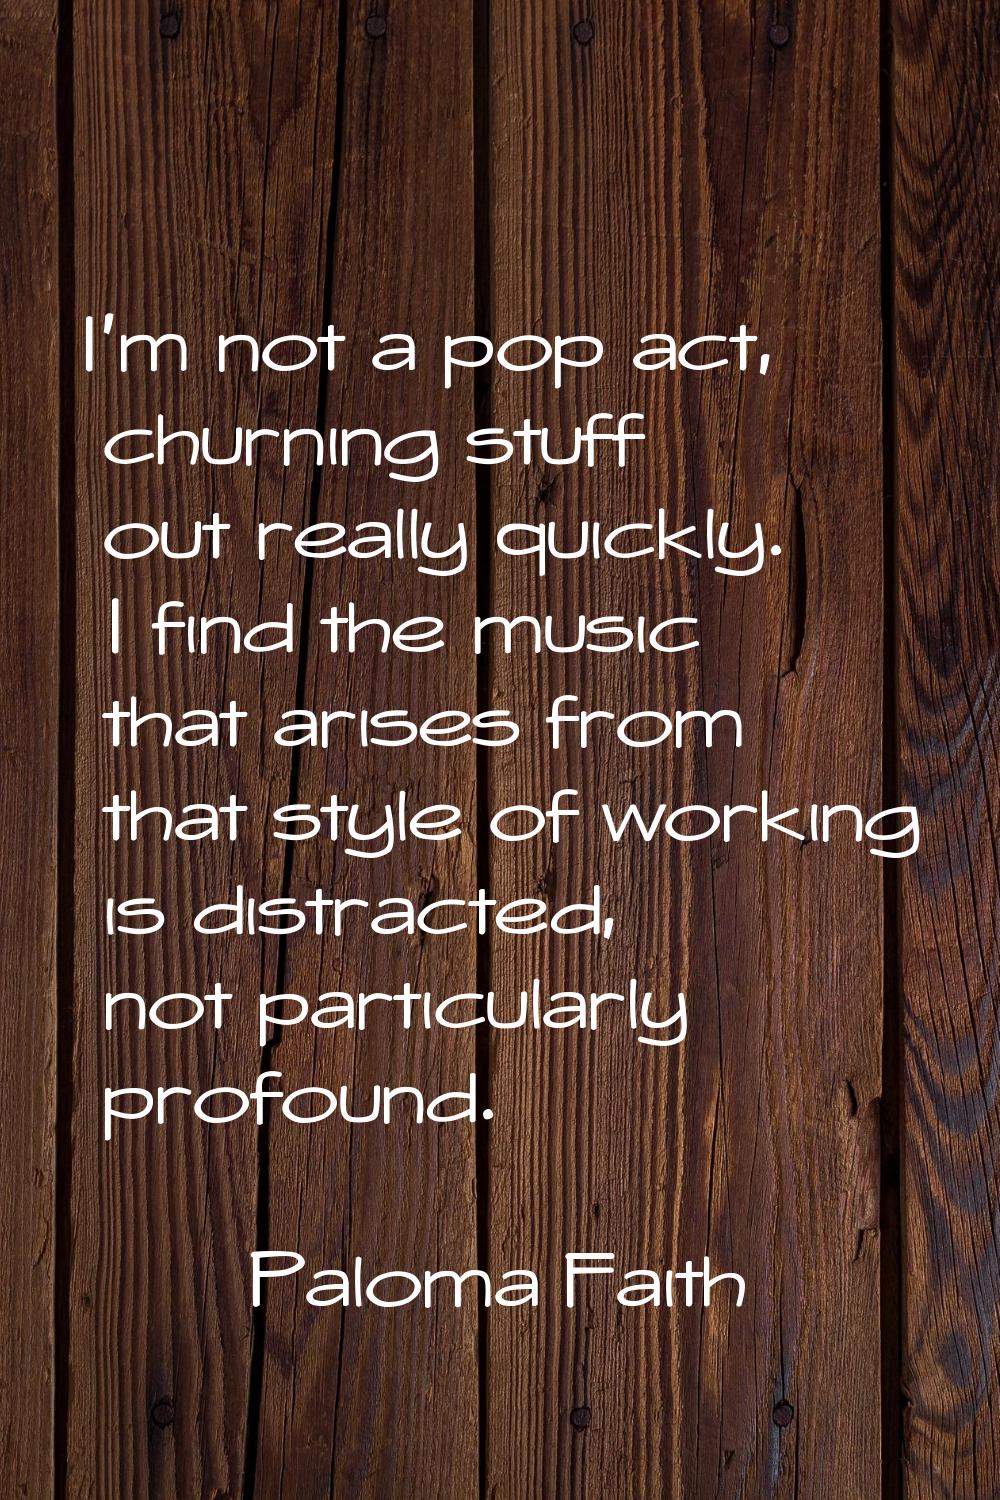 I'm not a pop act, churning stuff out really quickly. I find the music that arises from that style 